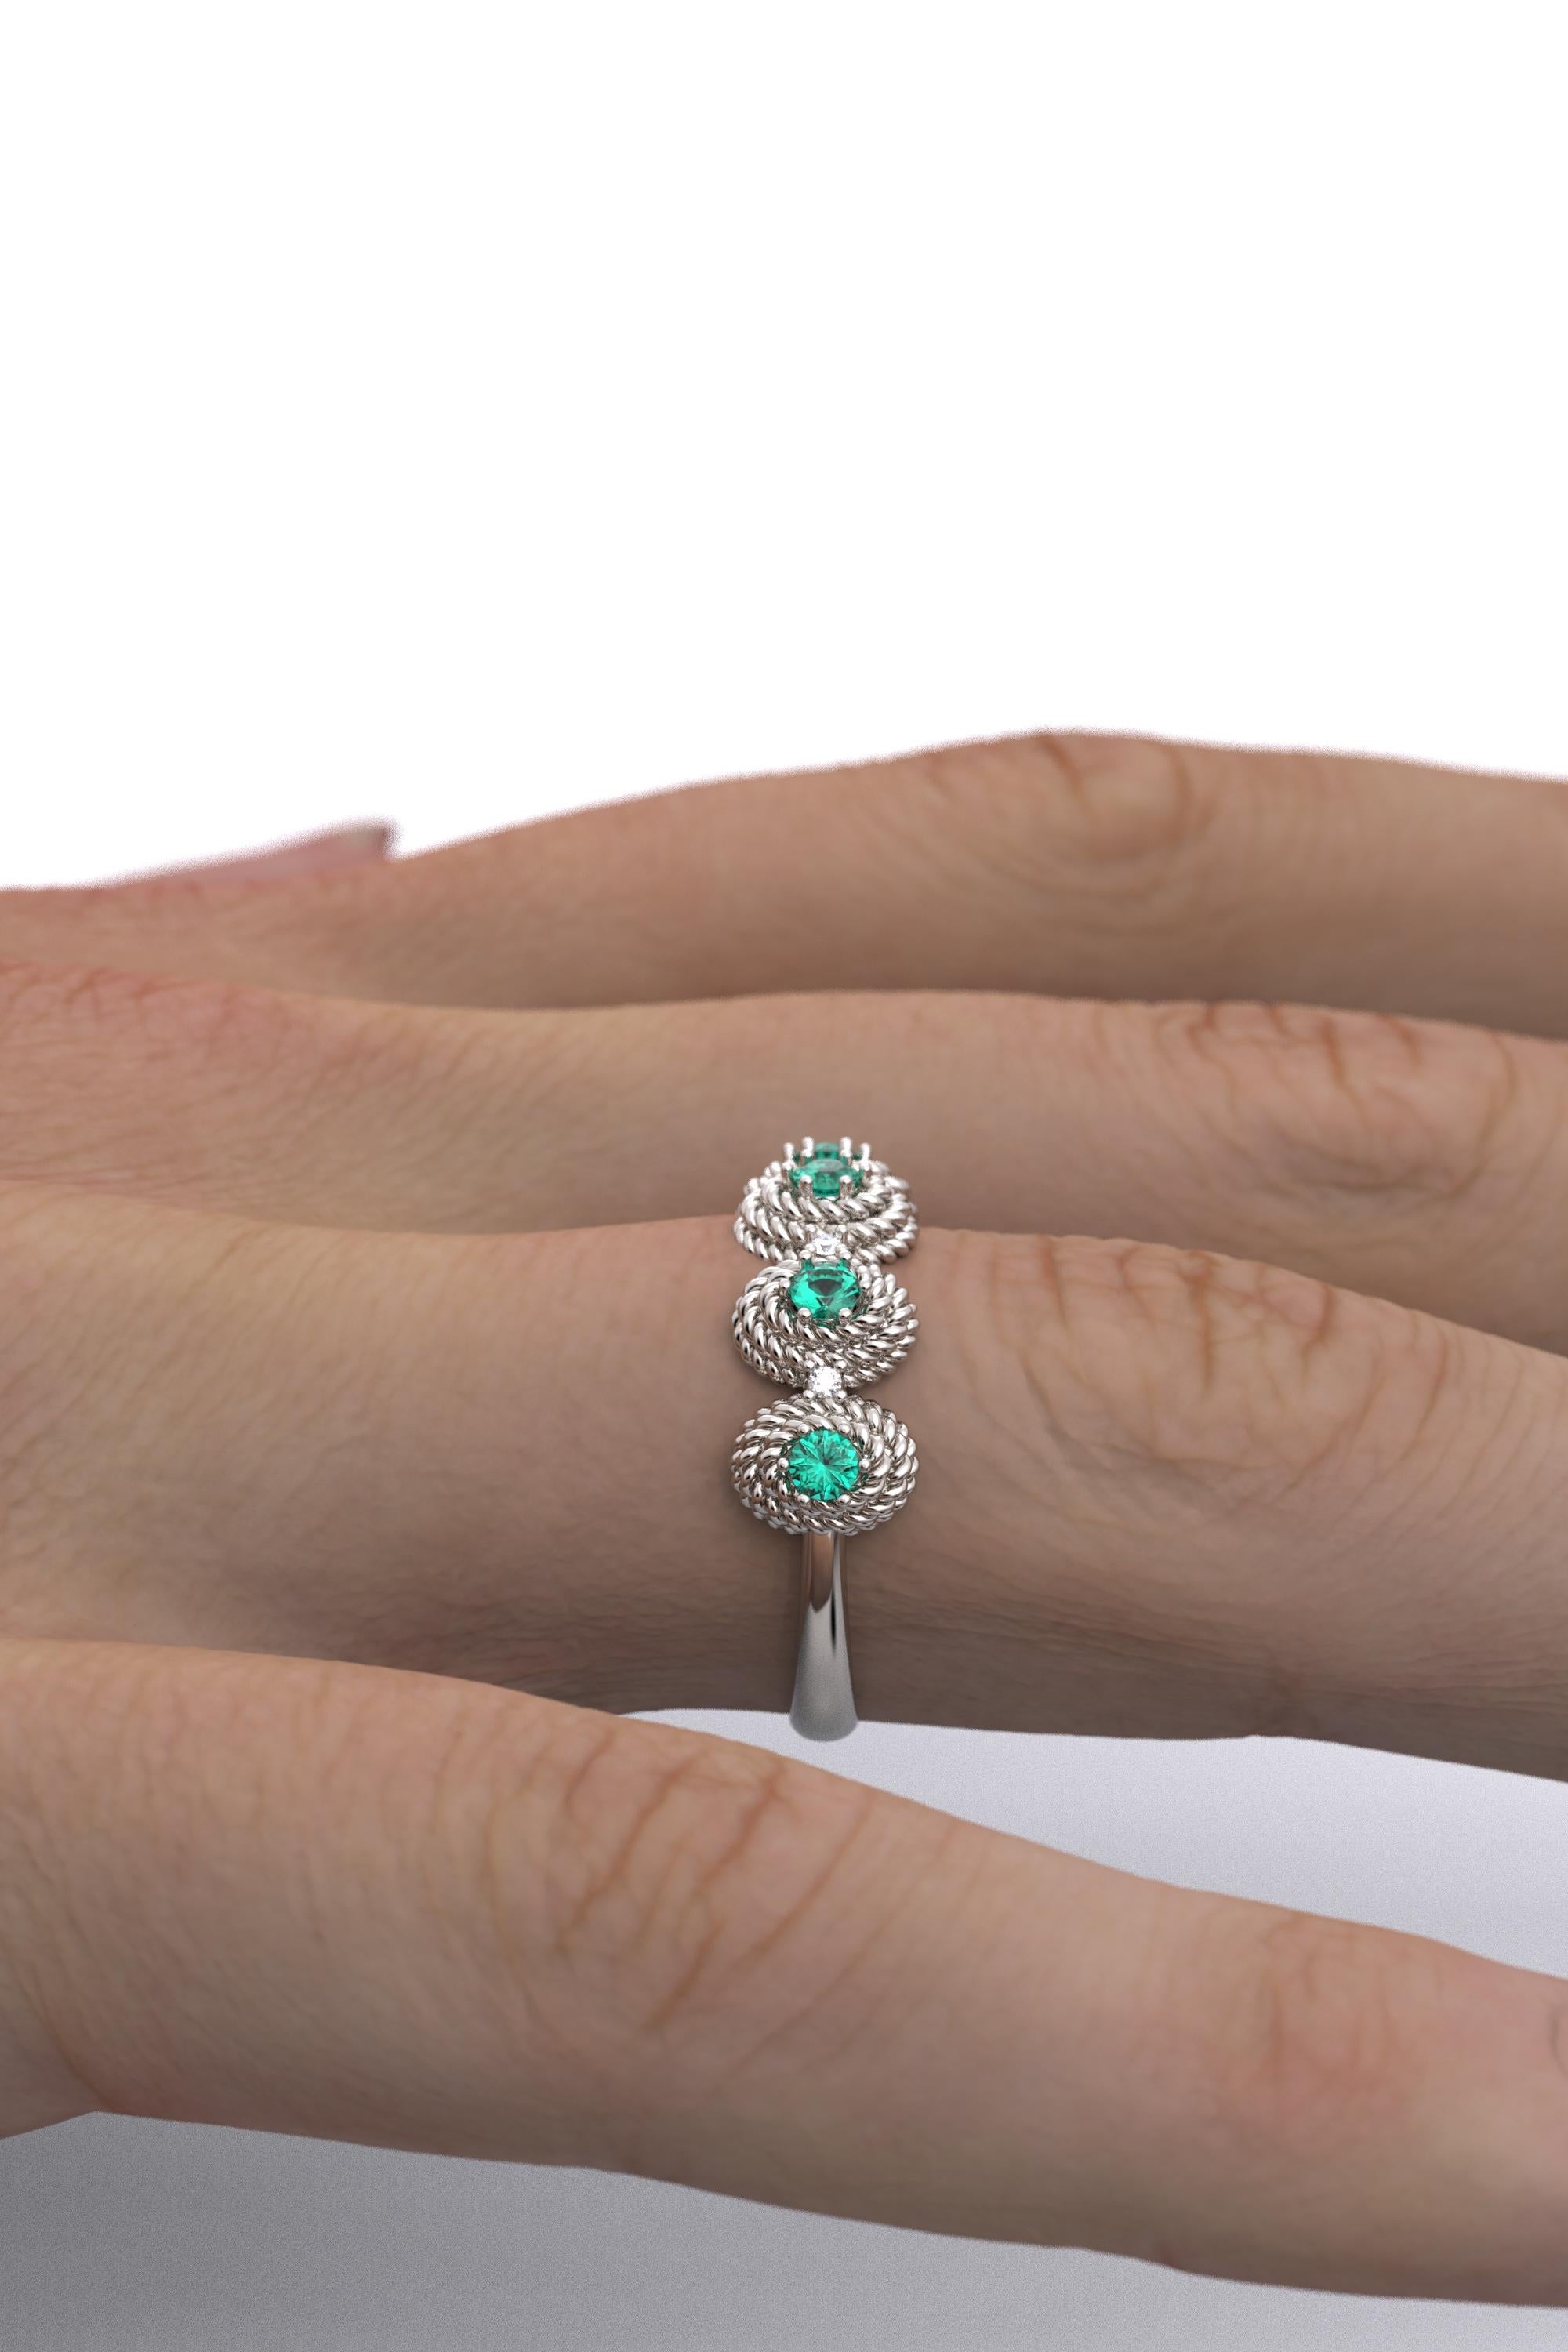 For Sale:  Emerald and Diamond Ring Made in Italy in 14k Gold by Oltremare Gioielli 11